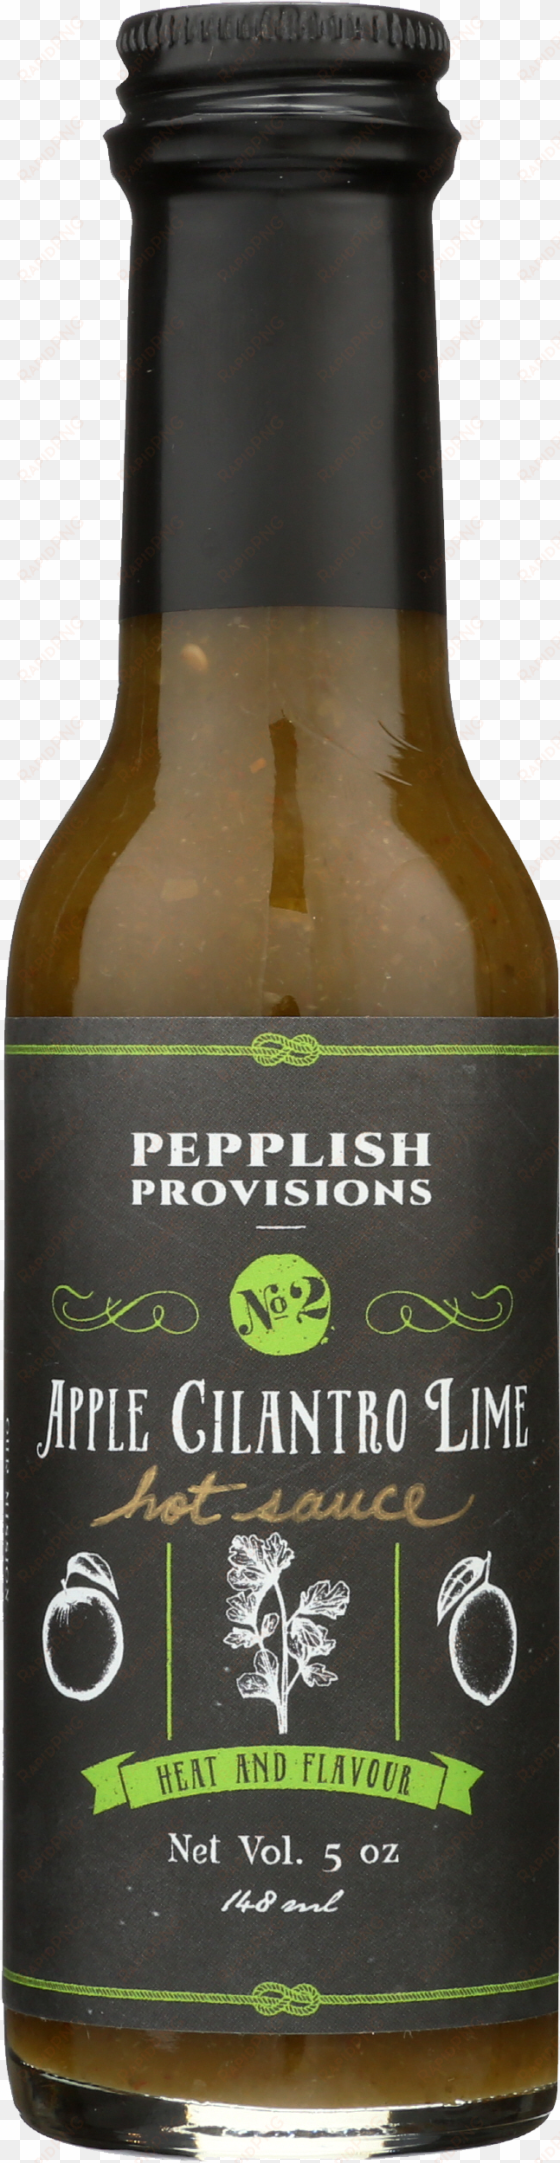 Acl - Pepplish Provisions - Apple Cilantro Lime Hot Sauce, transparent png image